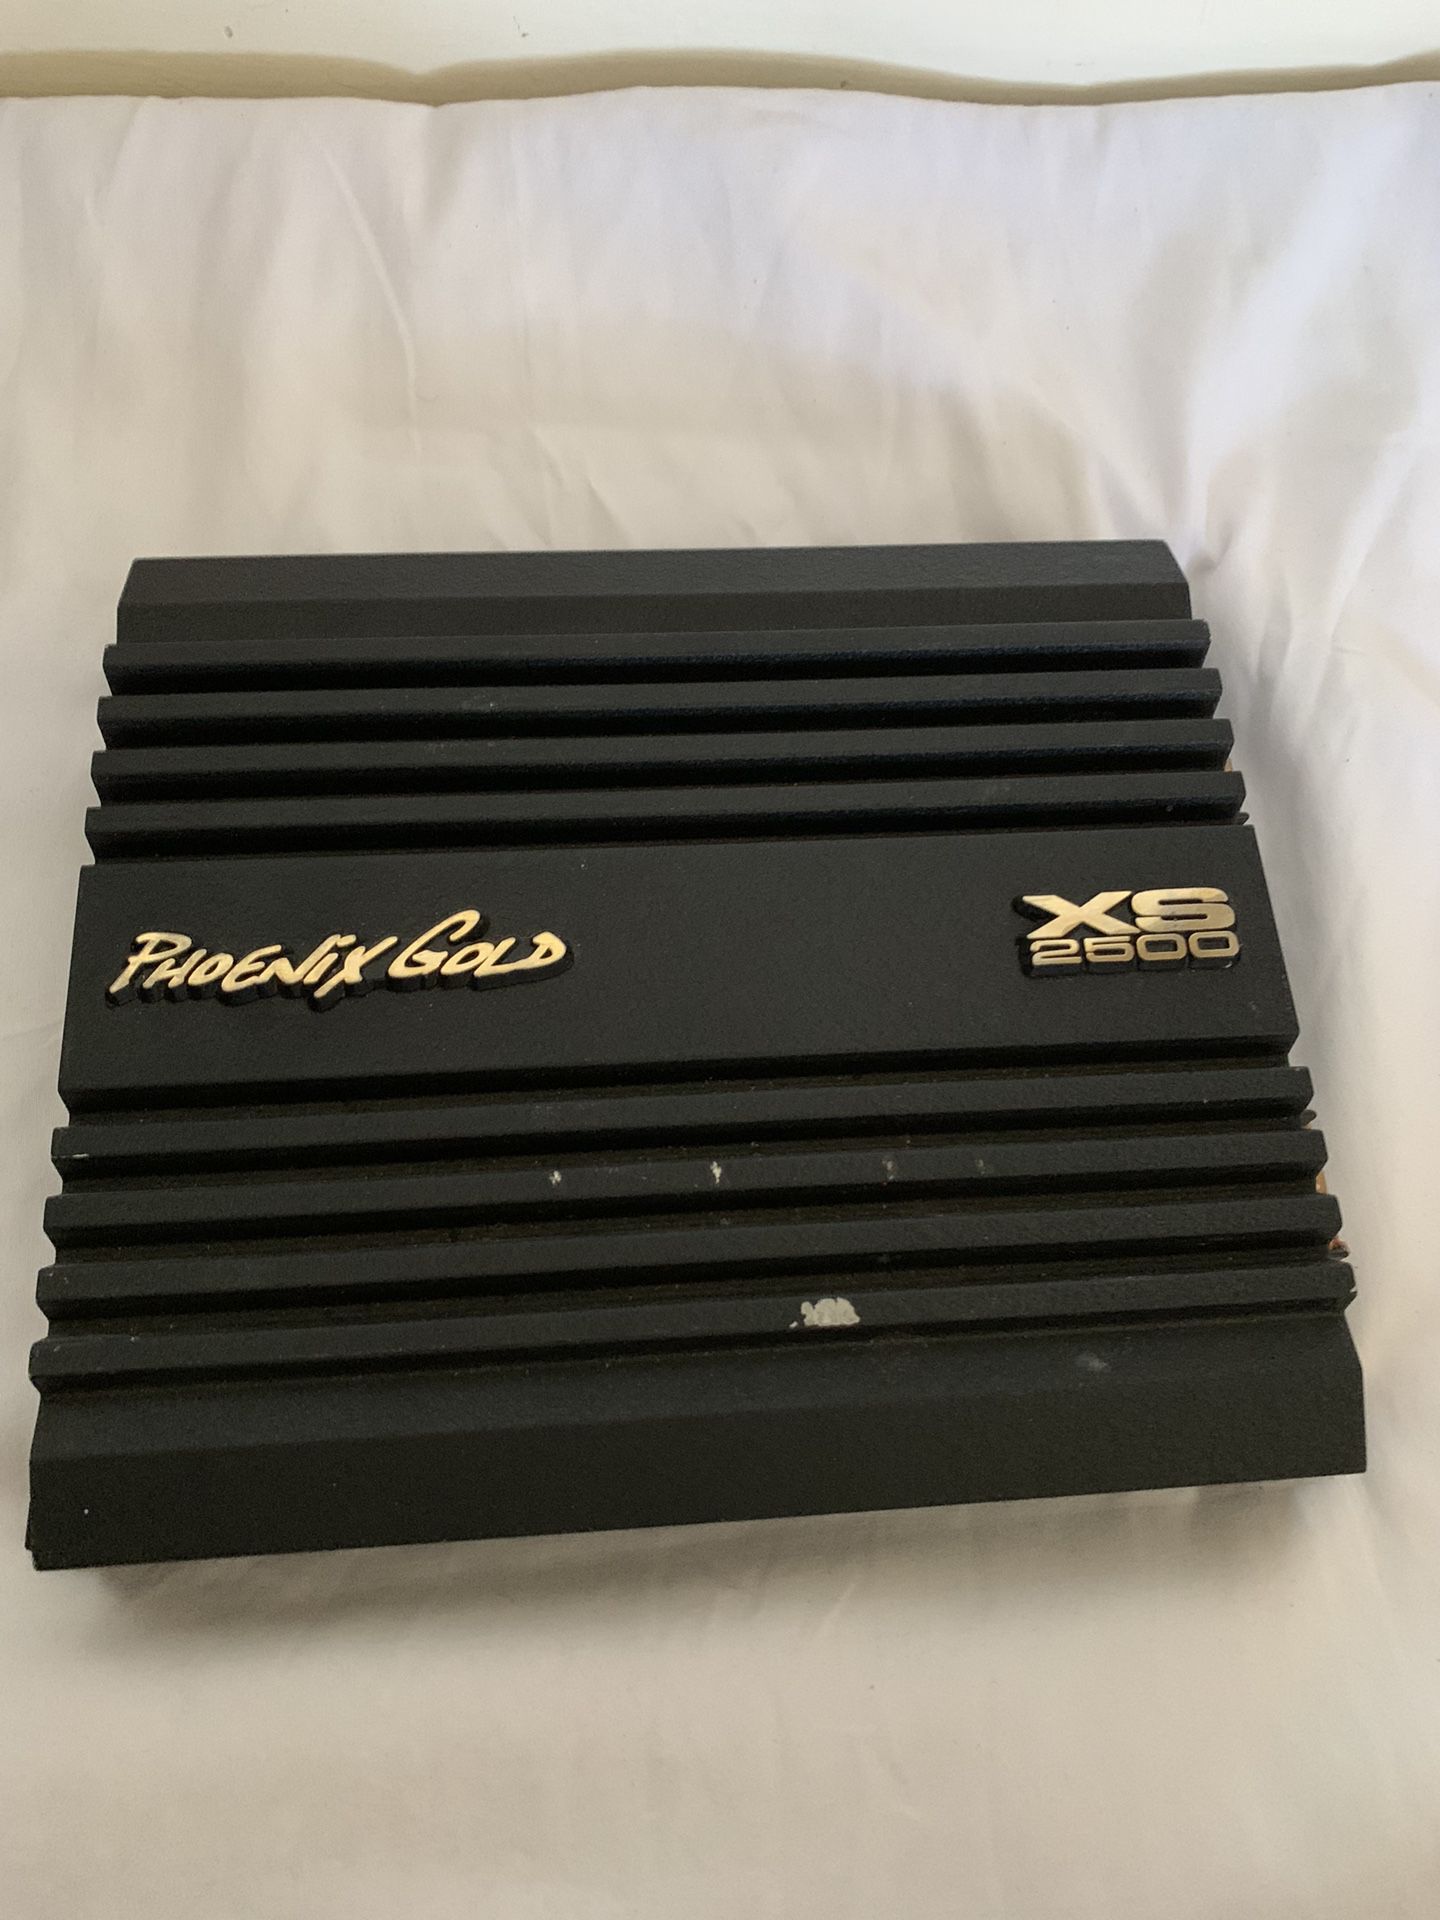 Phoenix Gold XS2300 OLD SCHOOL car audio amp Made In USA